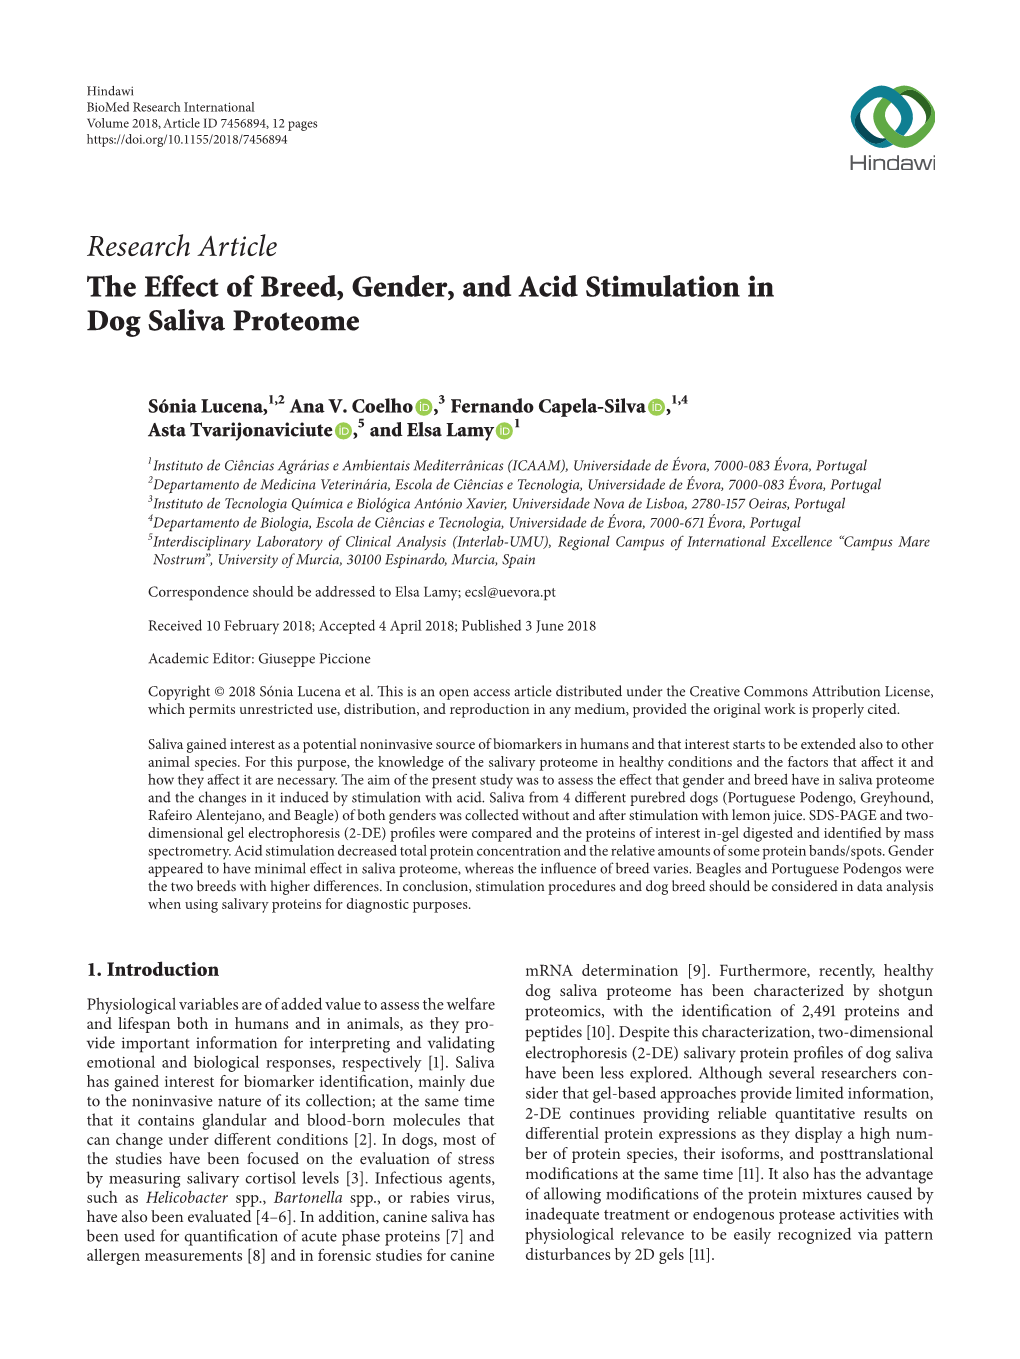 Research Article the Effect of Breed, Gender, and Acid Stimulation in Dog Saliva Proteome